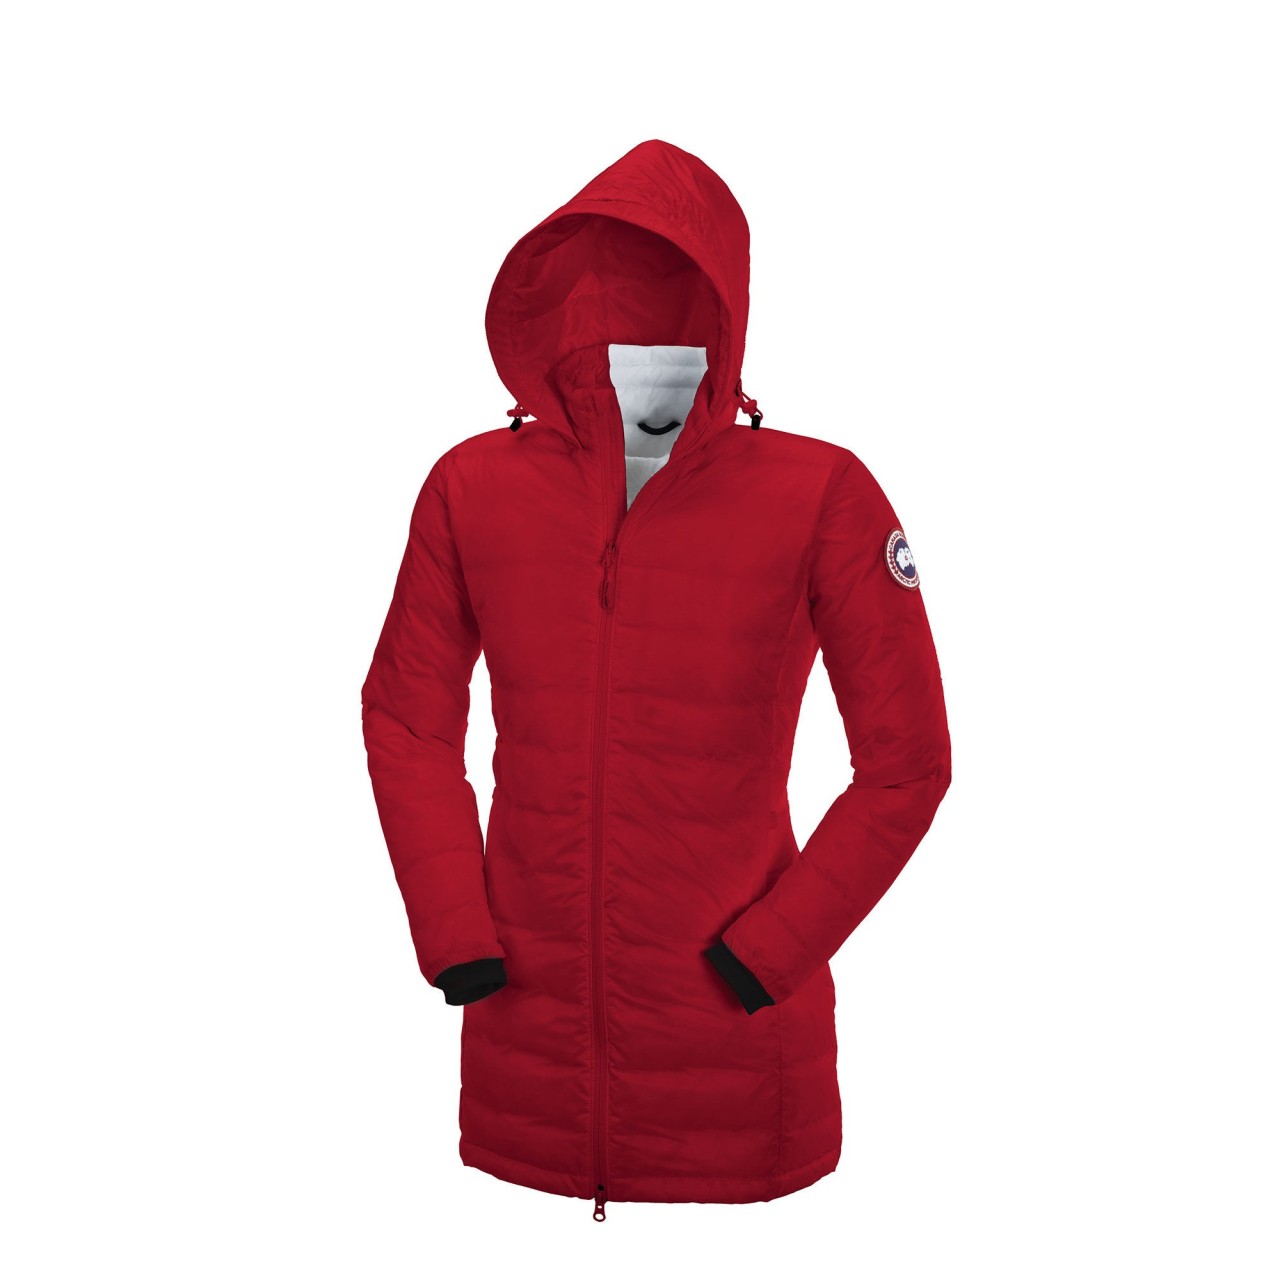 Canada Goose expedition parka online official - 70% Off Cheap Canada Goose Jackets Sale